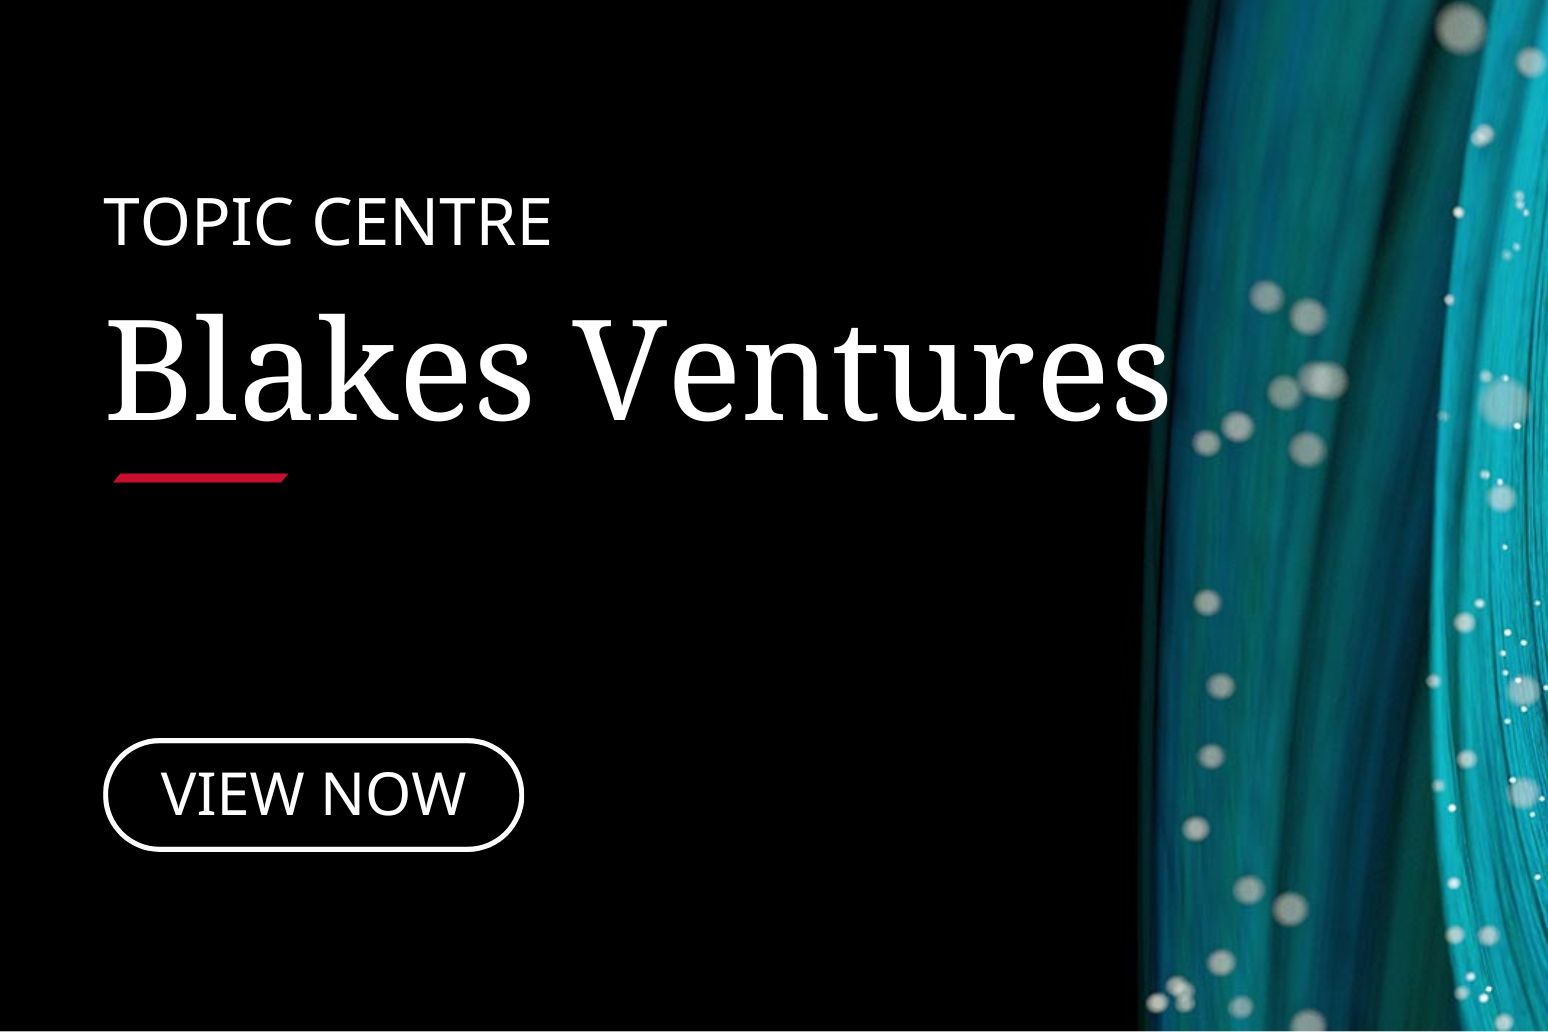 Click on this image to view the Blakes Ventures topic centre.